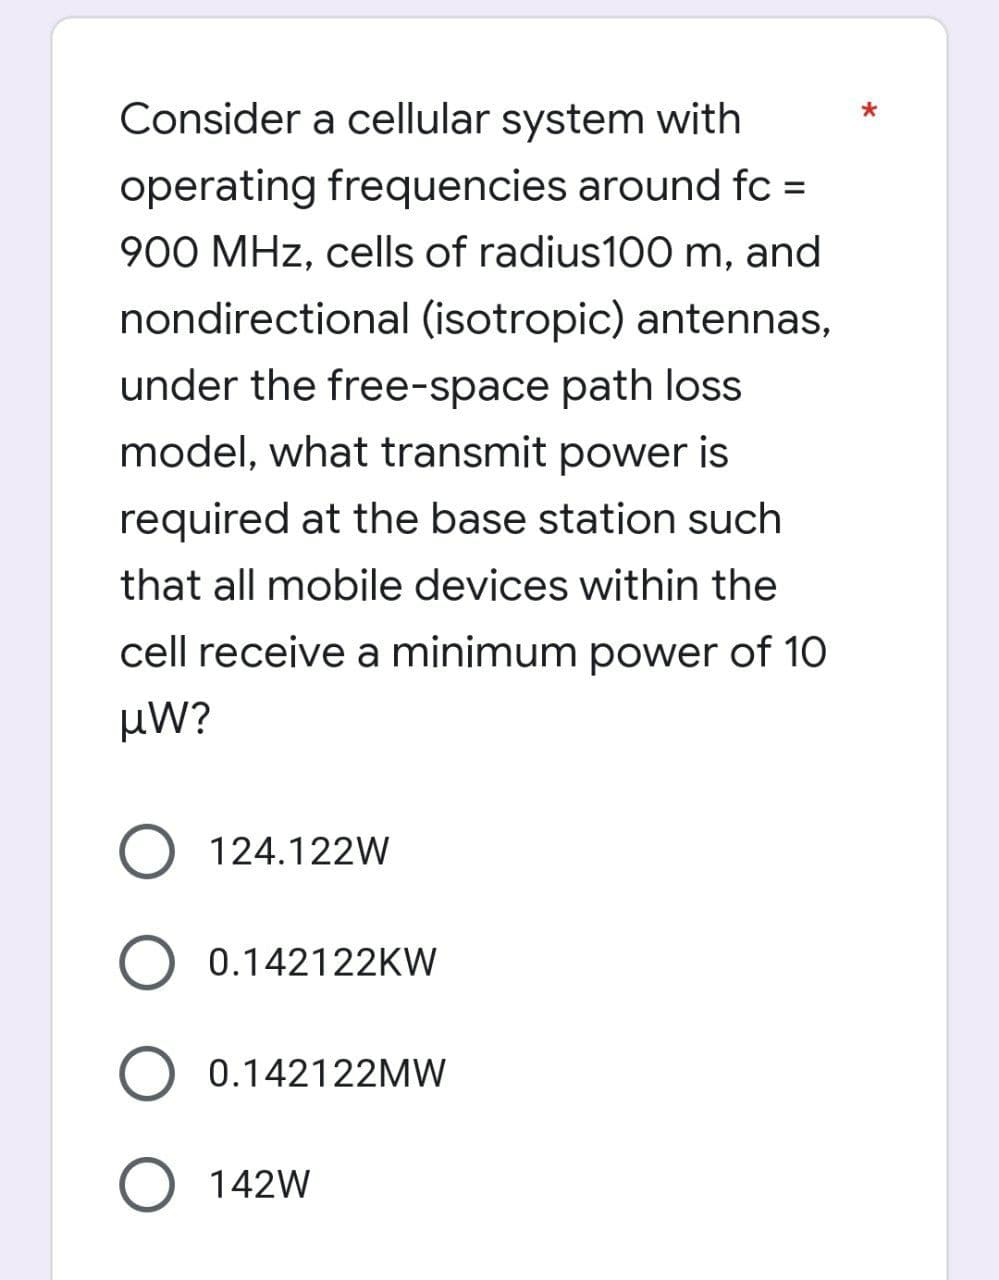 Consider a cellular system with
operating frequencies around fc =
900 MHz, cells of radius100 m, and
nondirectional (isotropic) antennas,
under the free-space path loss
model, what transmit power is
required at the base station such
that all mobile devices within the
cell receive a minimum power of 10
µW?
O 124.122W
O 0.142122KW
0.142122MW
142W
